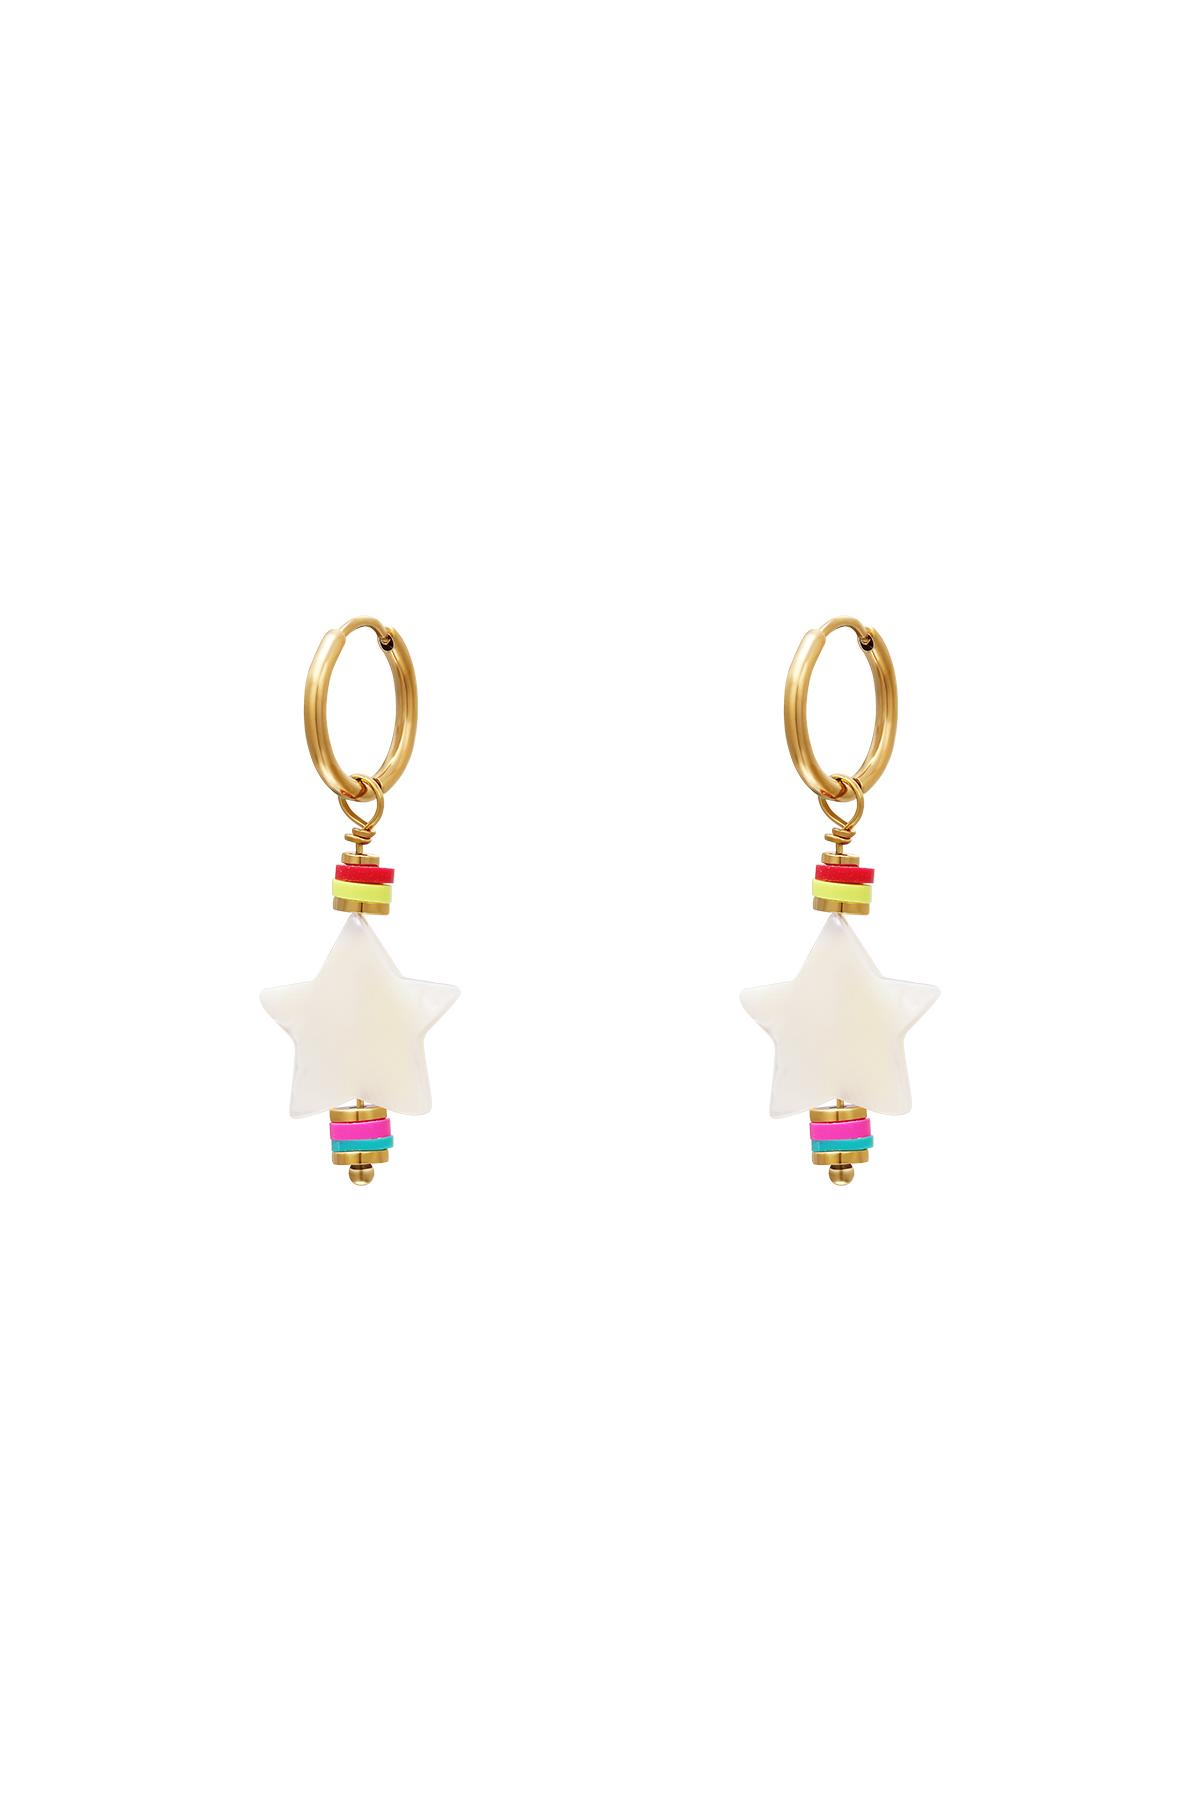 Beads &amp; Stars earrings - #summergirls collection Gold Sea Shells